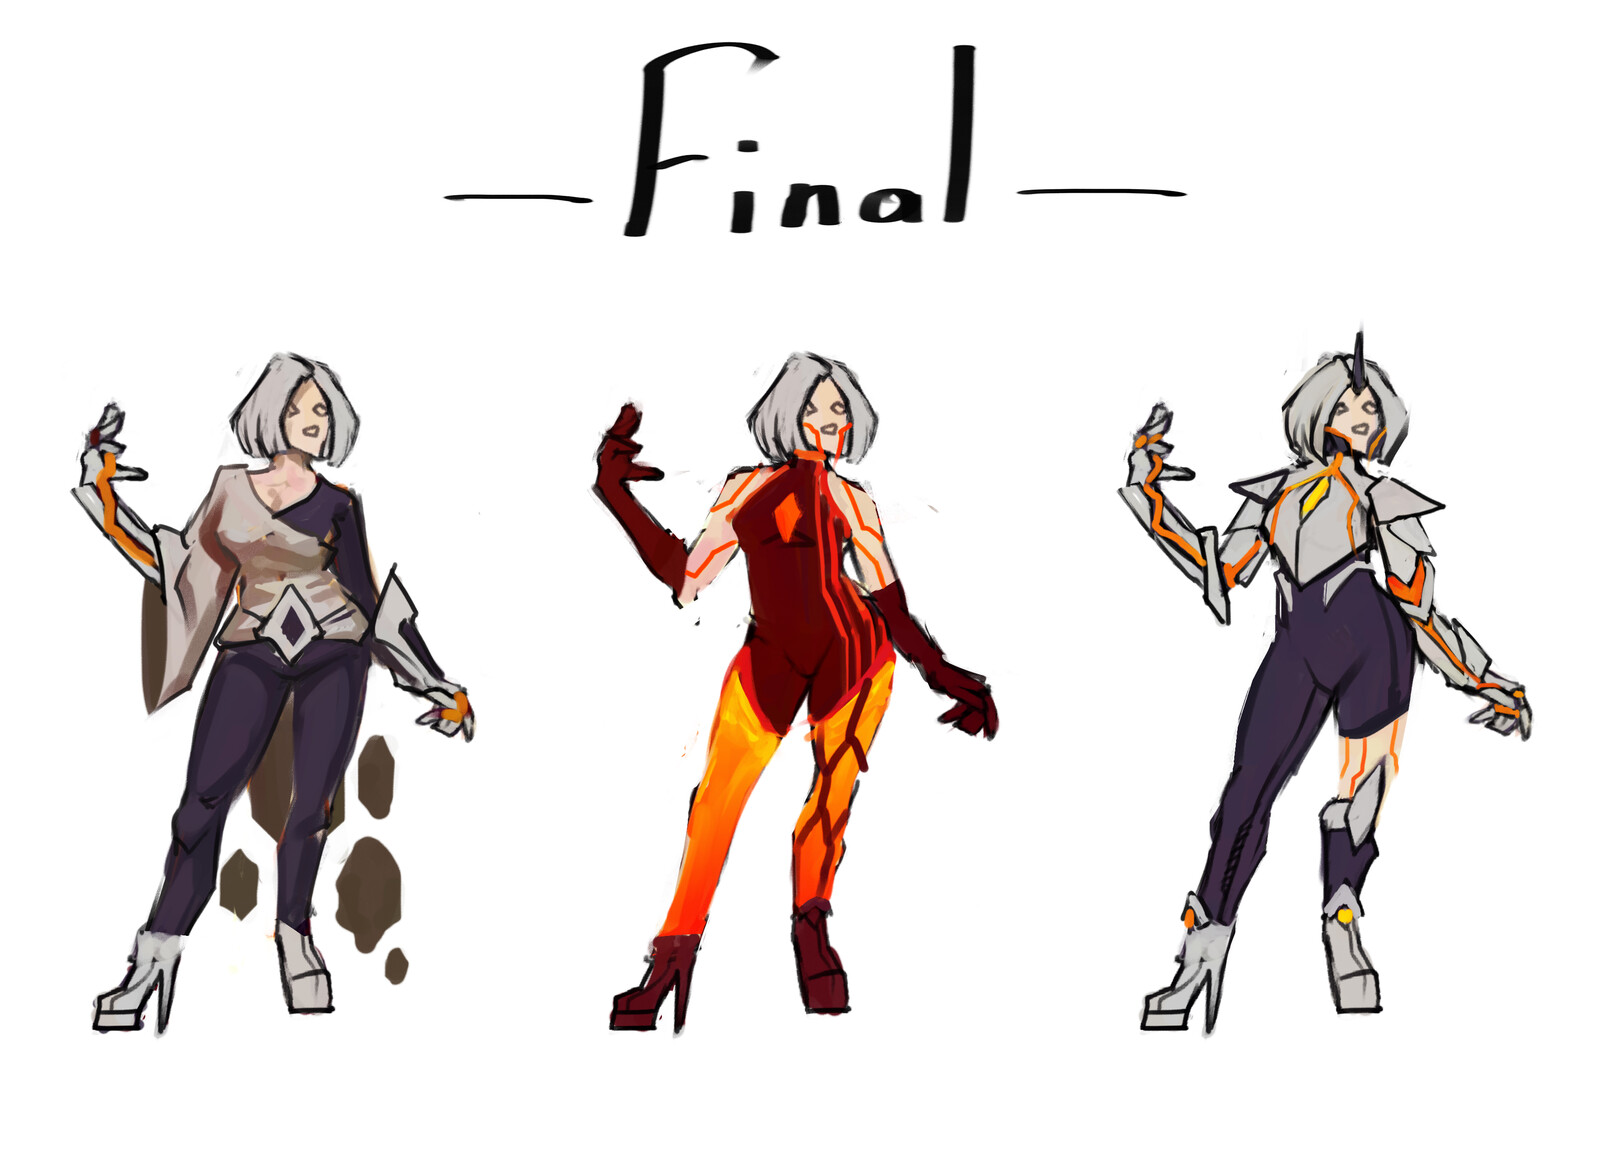 3 final outfits